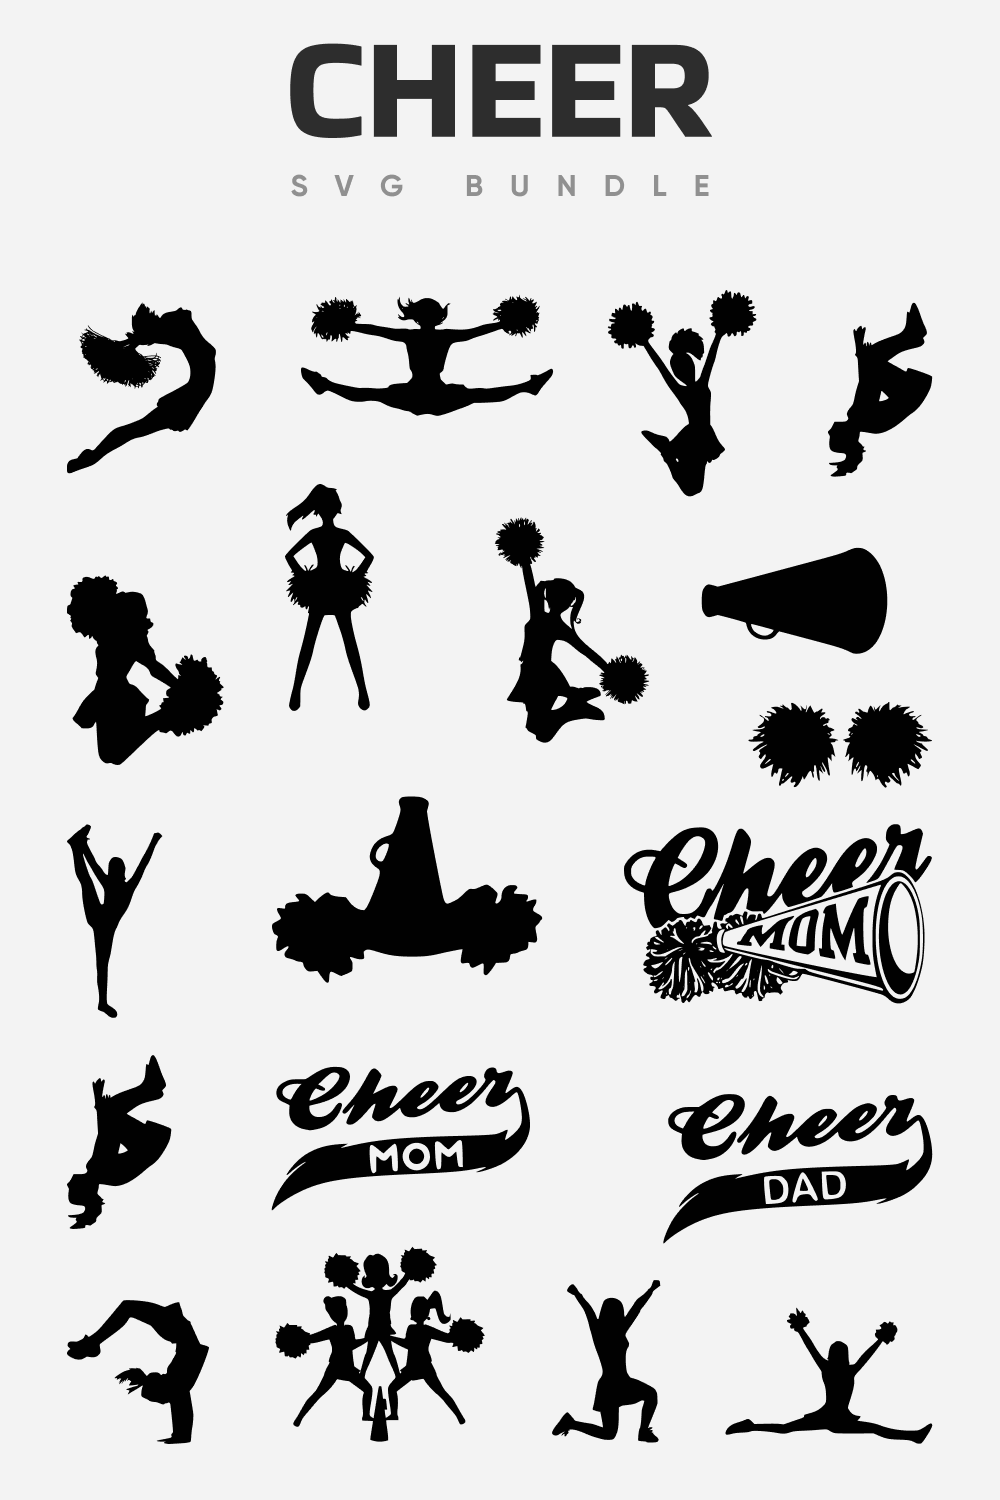  Silhouettes of cheerleaders who perform different tricks.